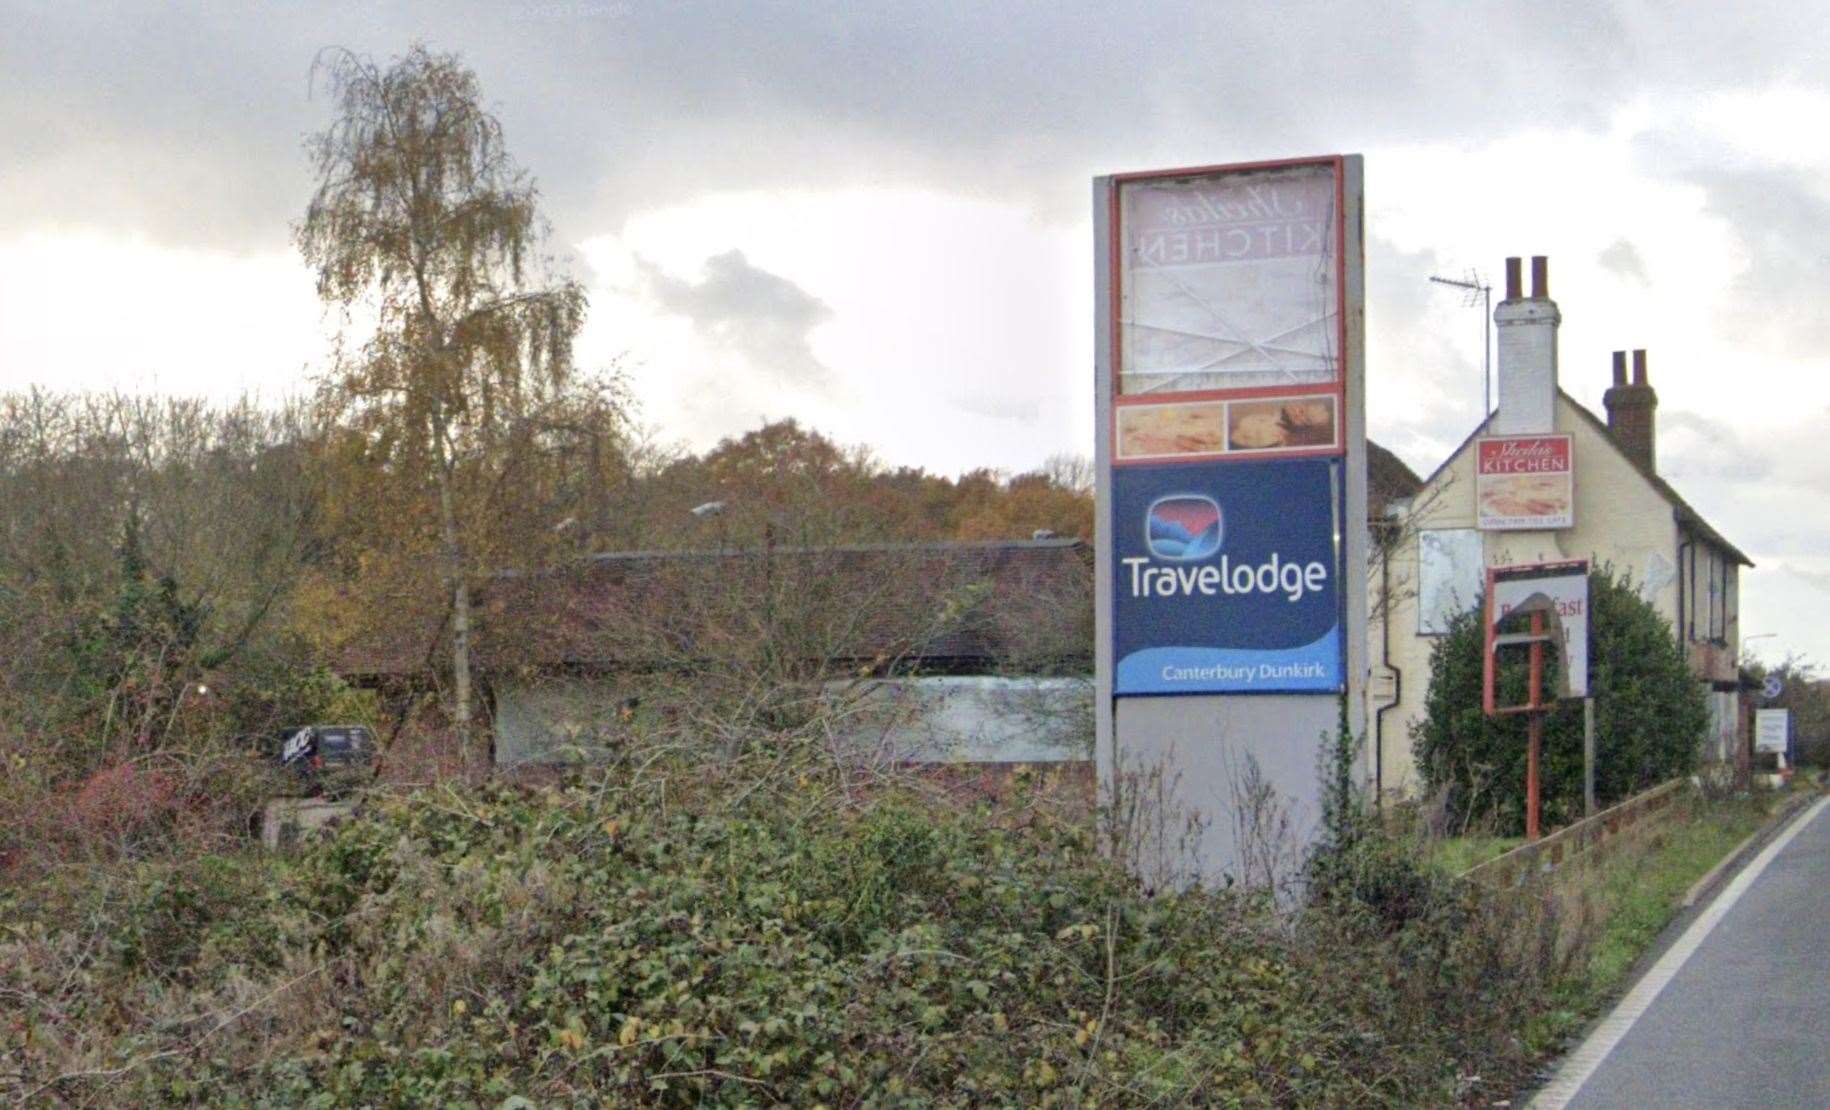 The Travelodge at Gate Services, Dunkirk, closed in May this year